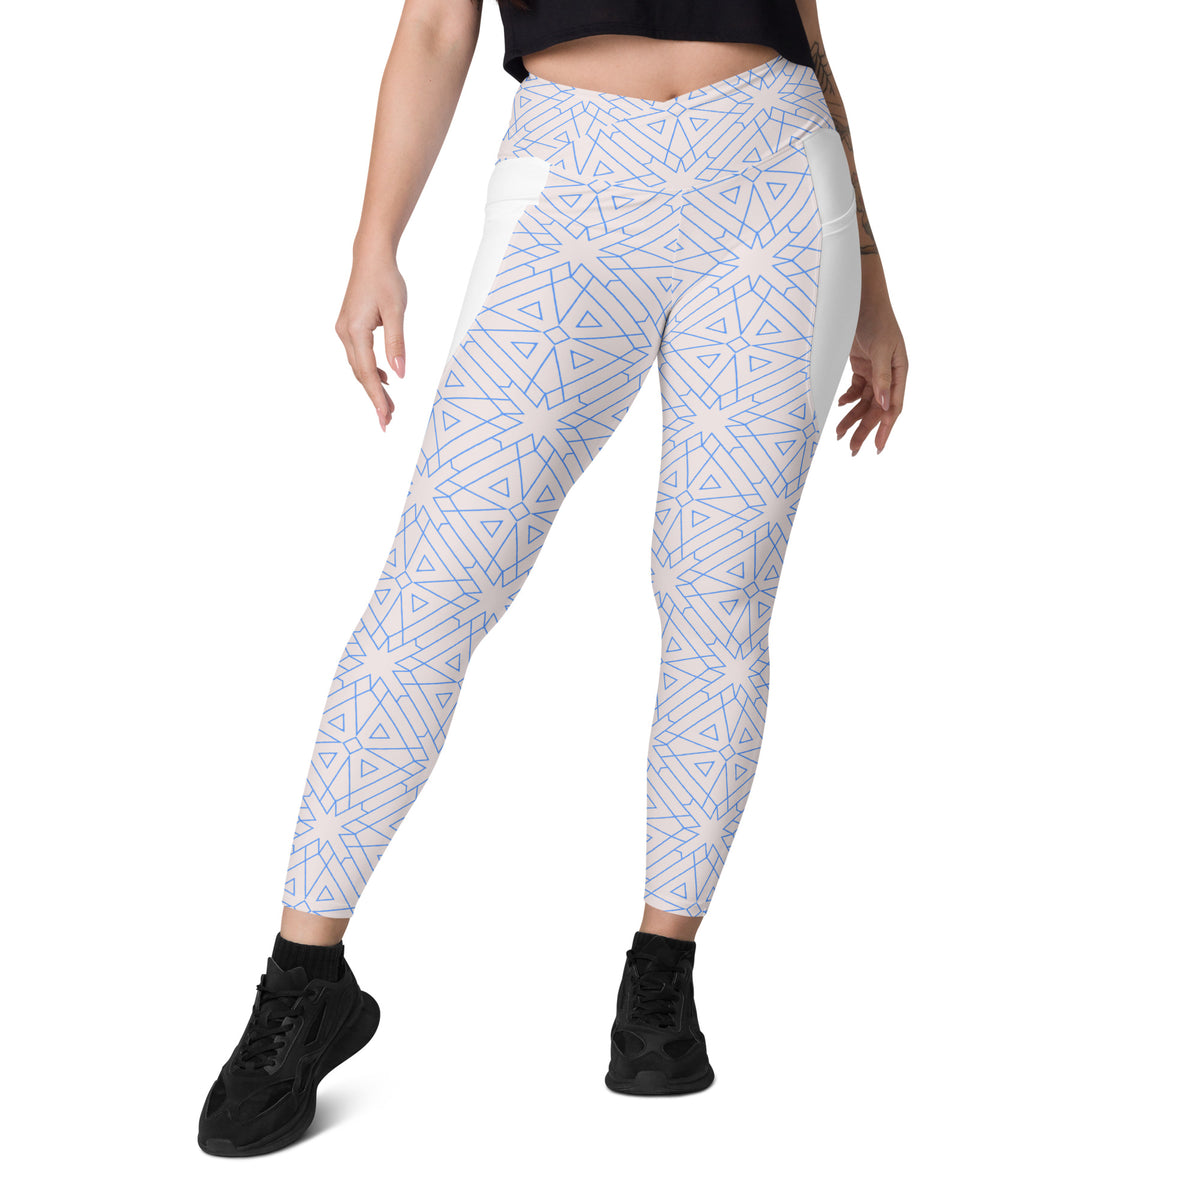 Cosmic Chaos pattern on crossover leggings with side pockets.